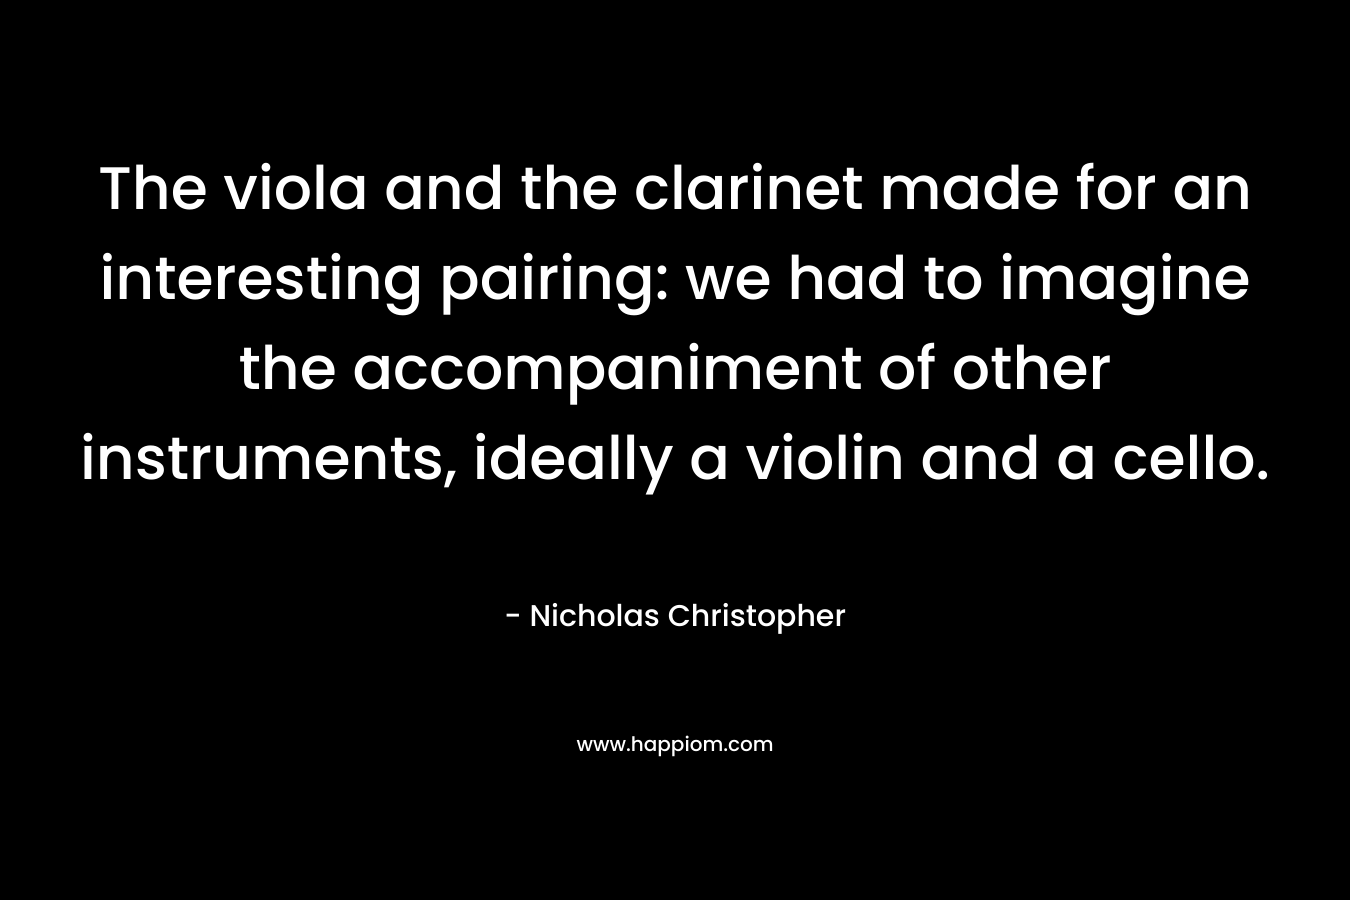 The viola and the clarinet made for an interesting pairing: we had to imagine the accompaniment of other instruments, ideally a violin and a cello. – Nicholas Christopher